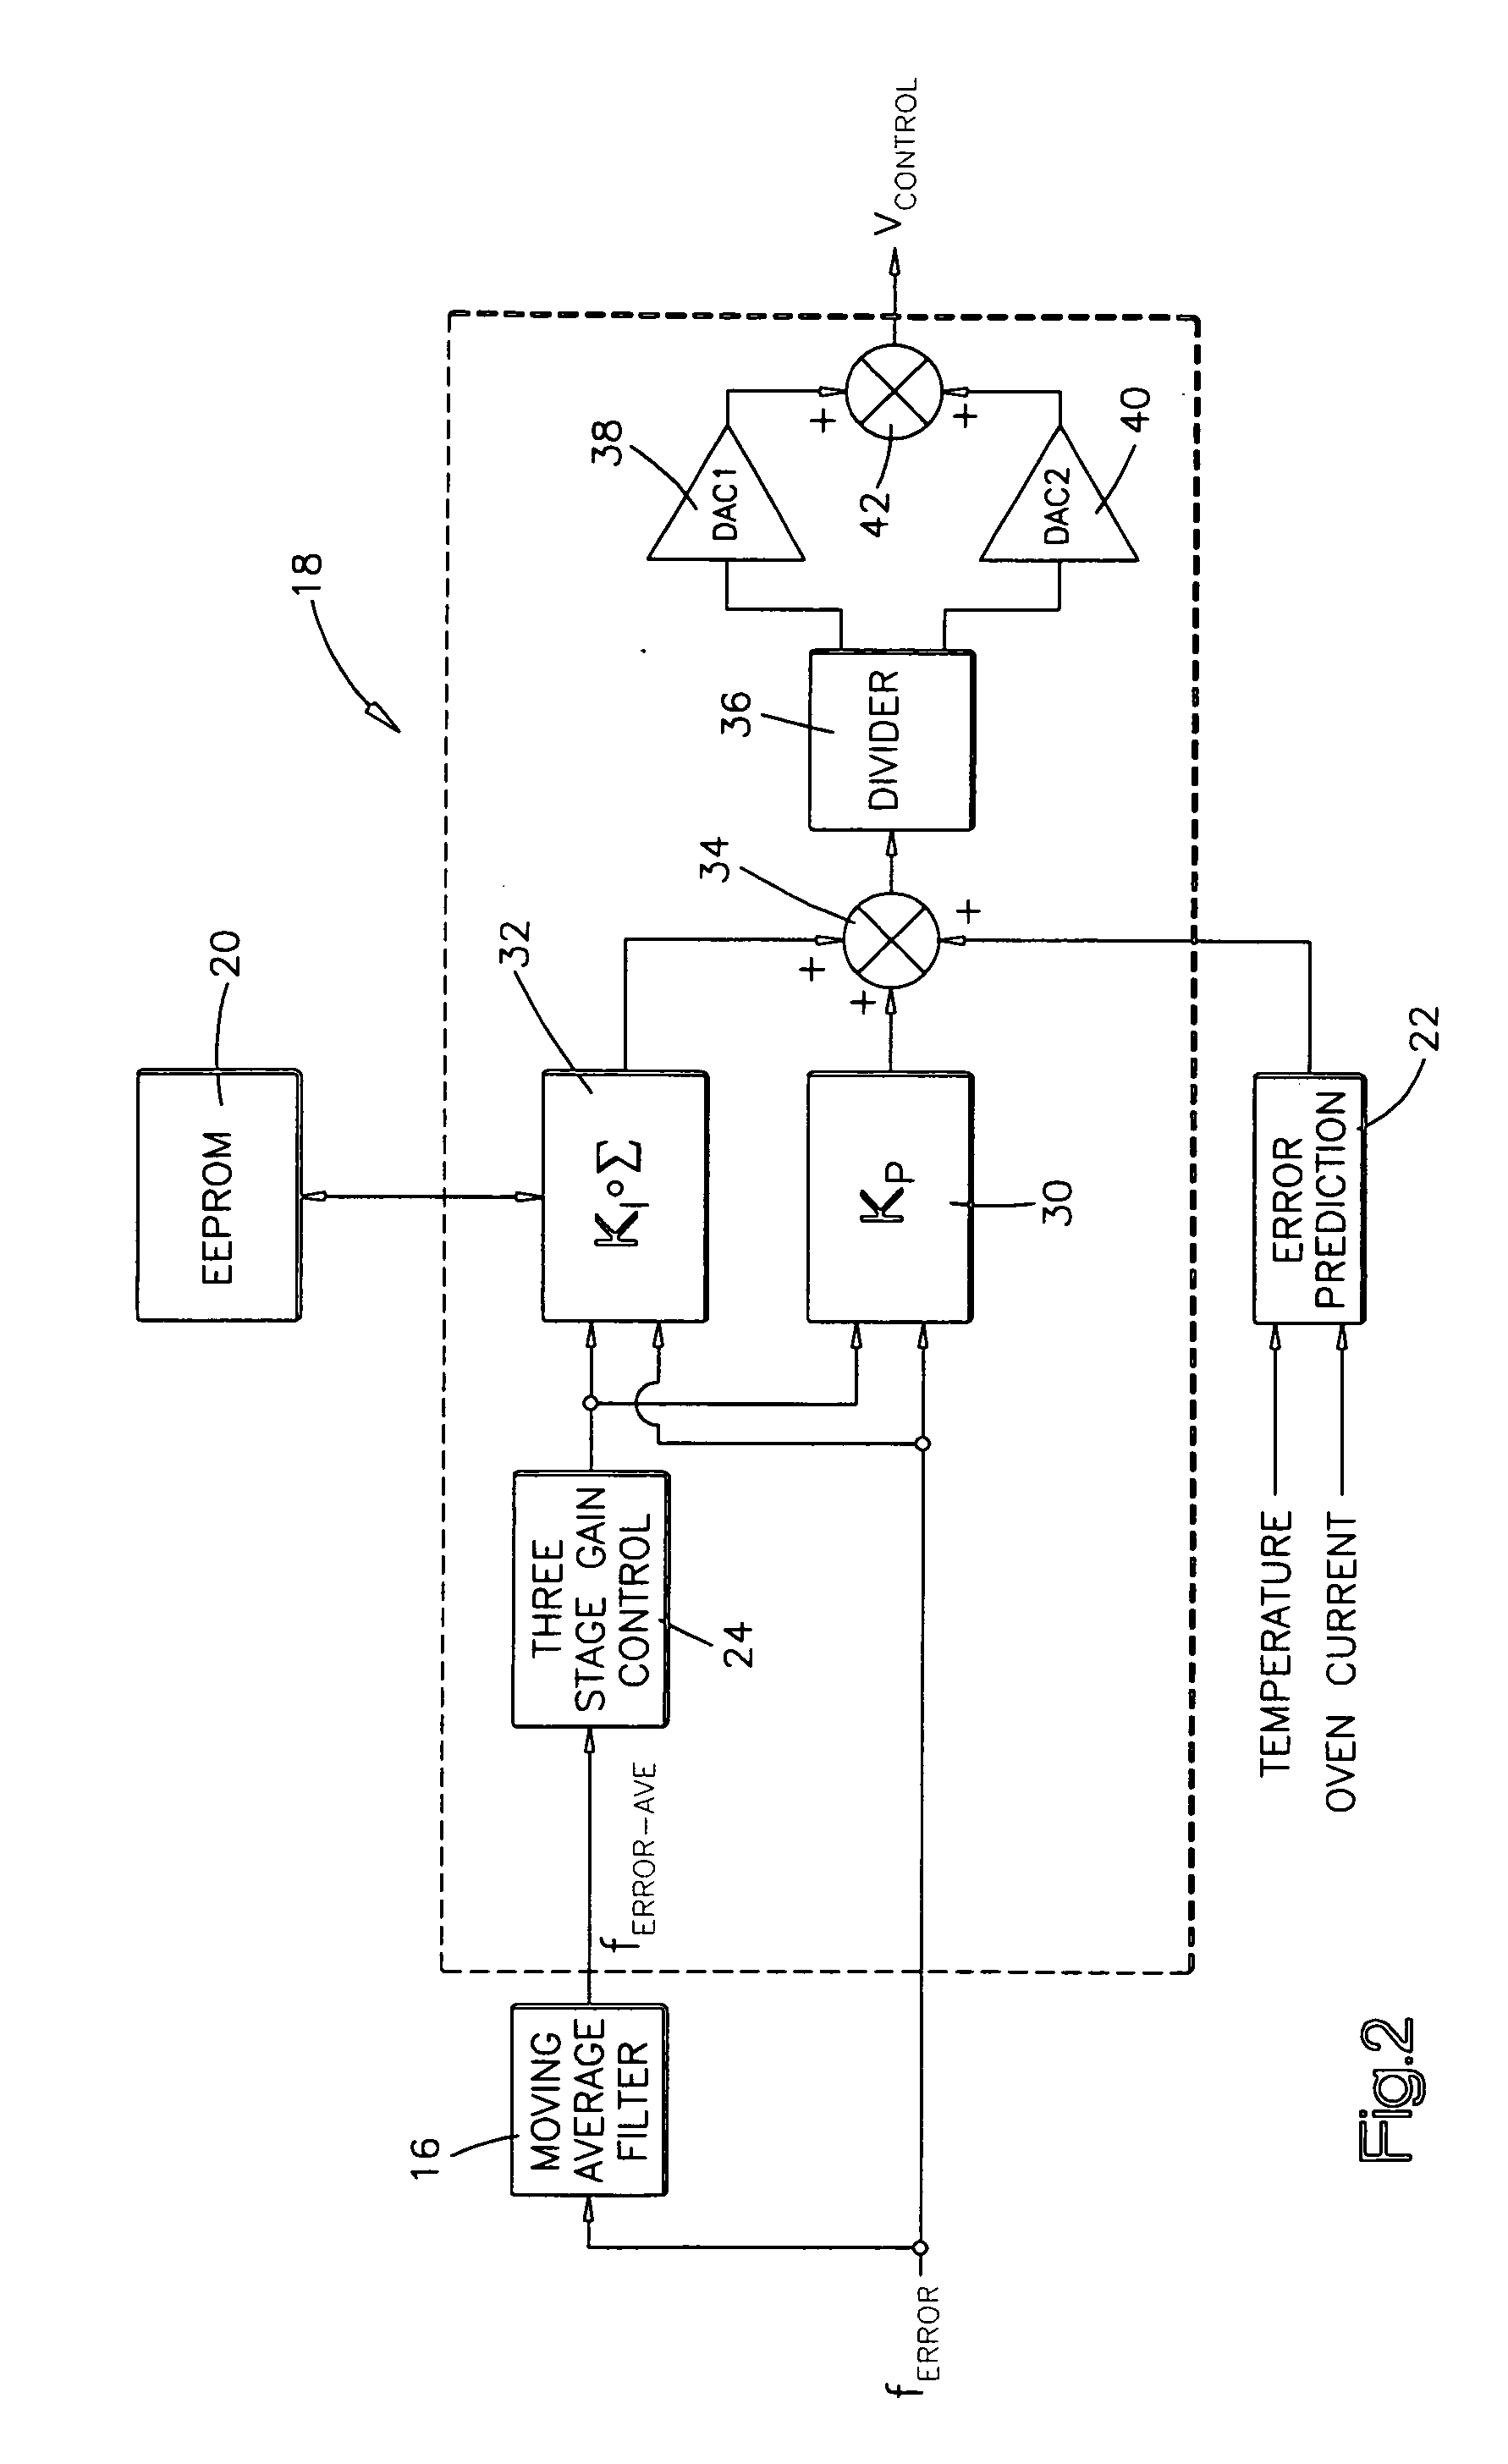 Phase lock control system for a voltage controlled oscillator